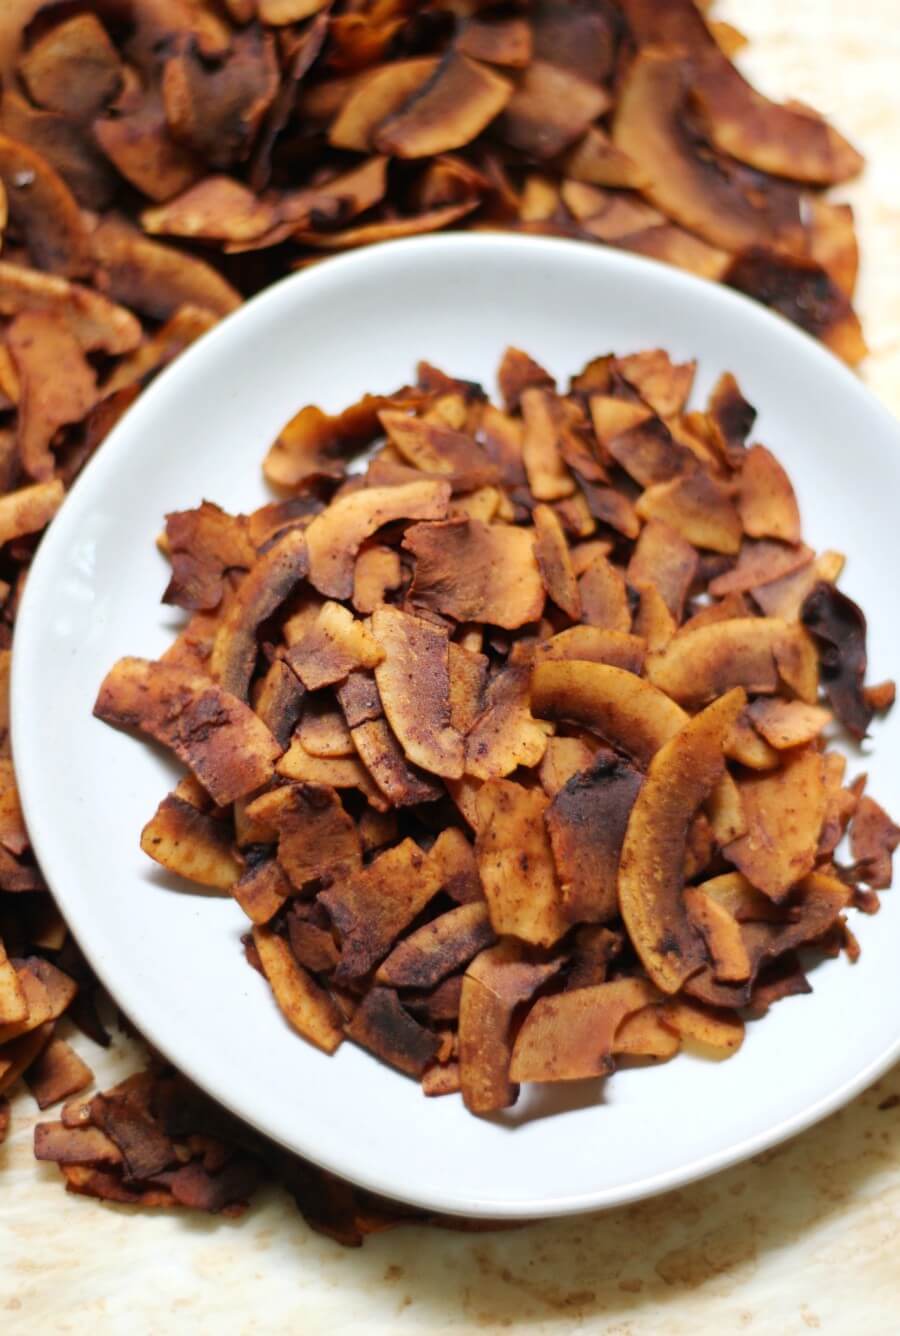 coconut bacon on a grey plate